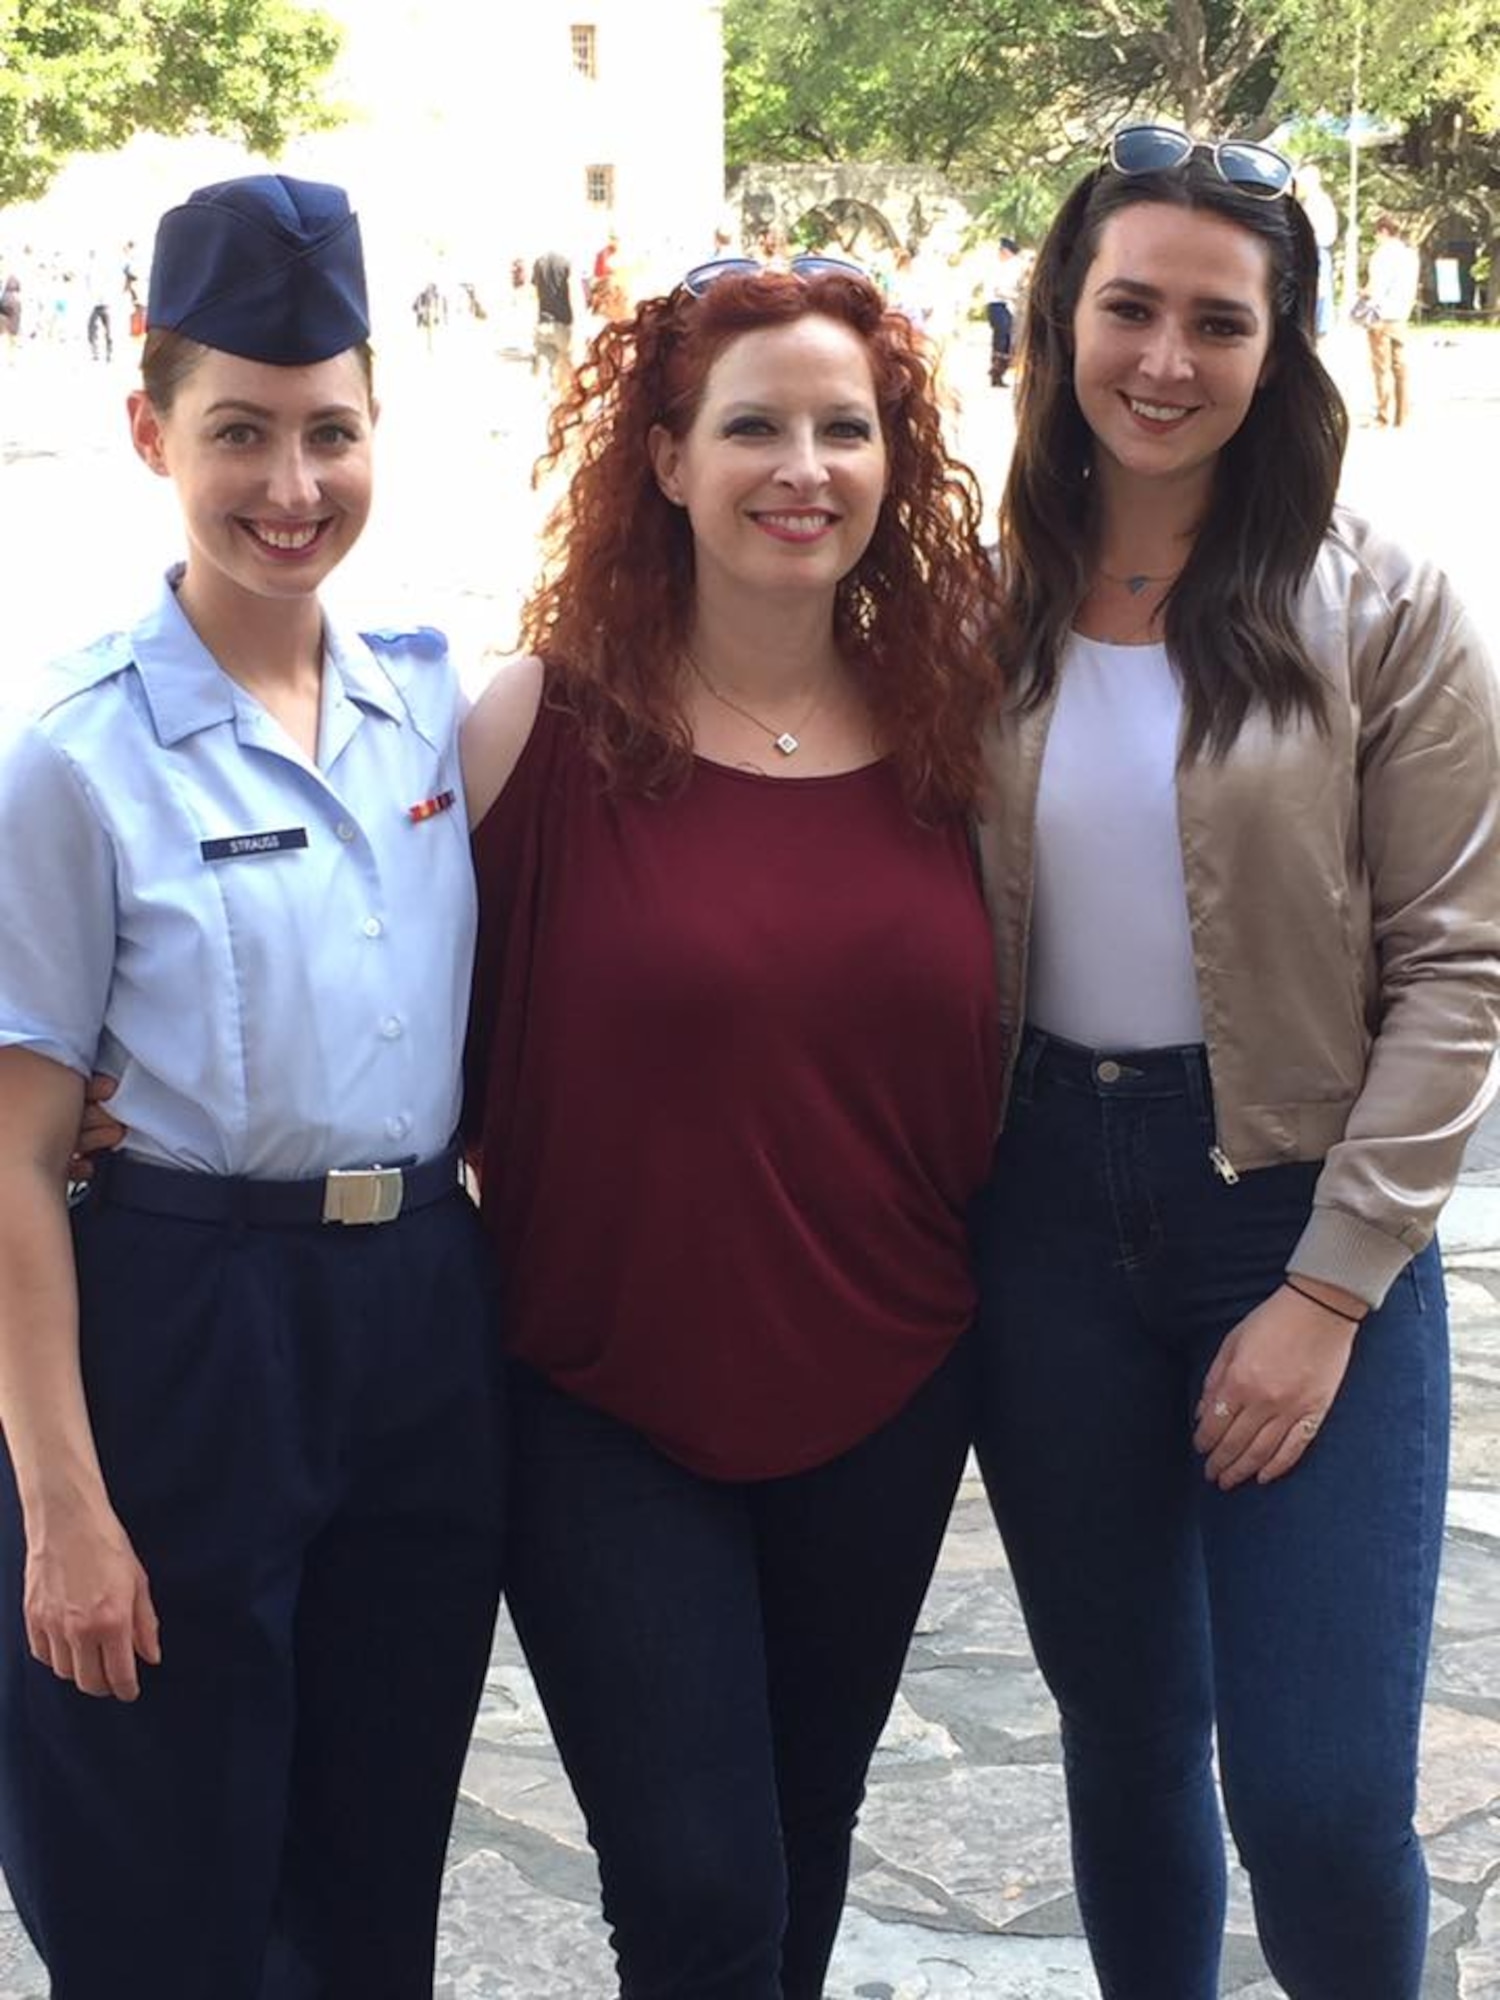 Living for the fallen: An Airman’s fight for her heritage